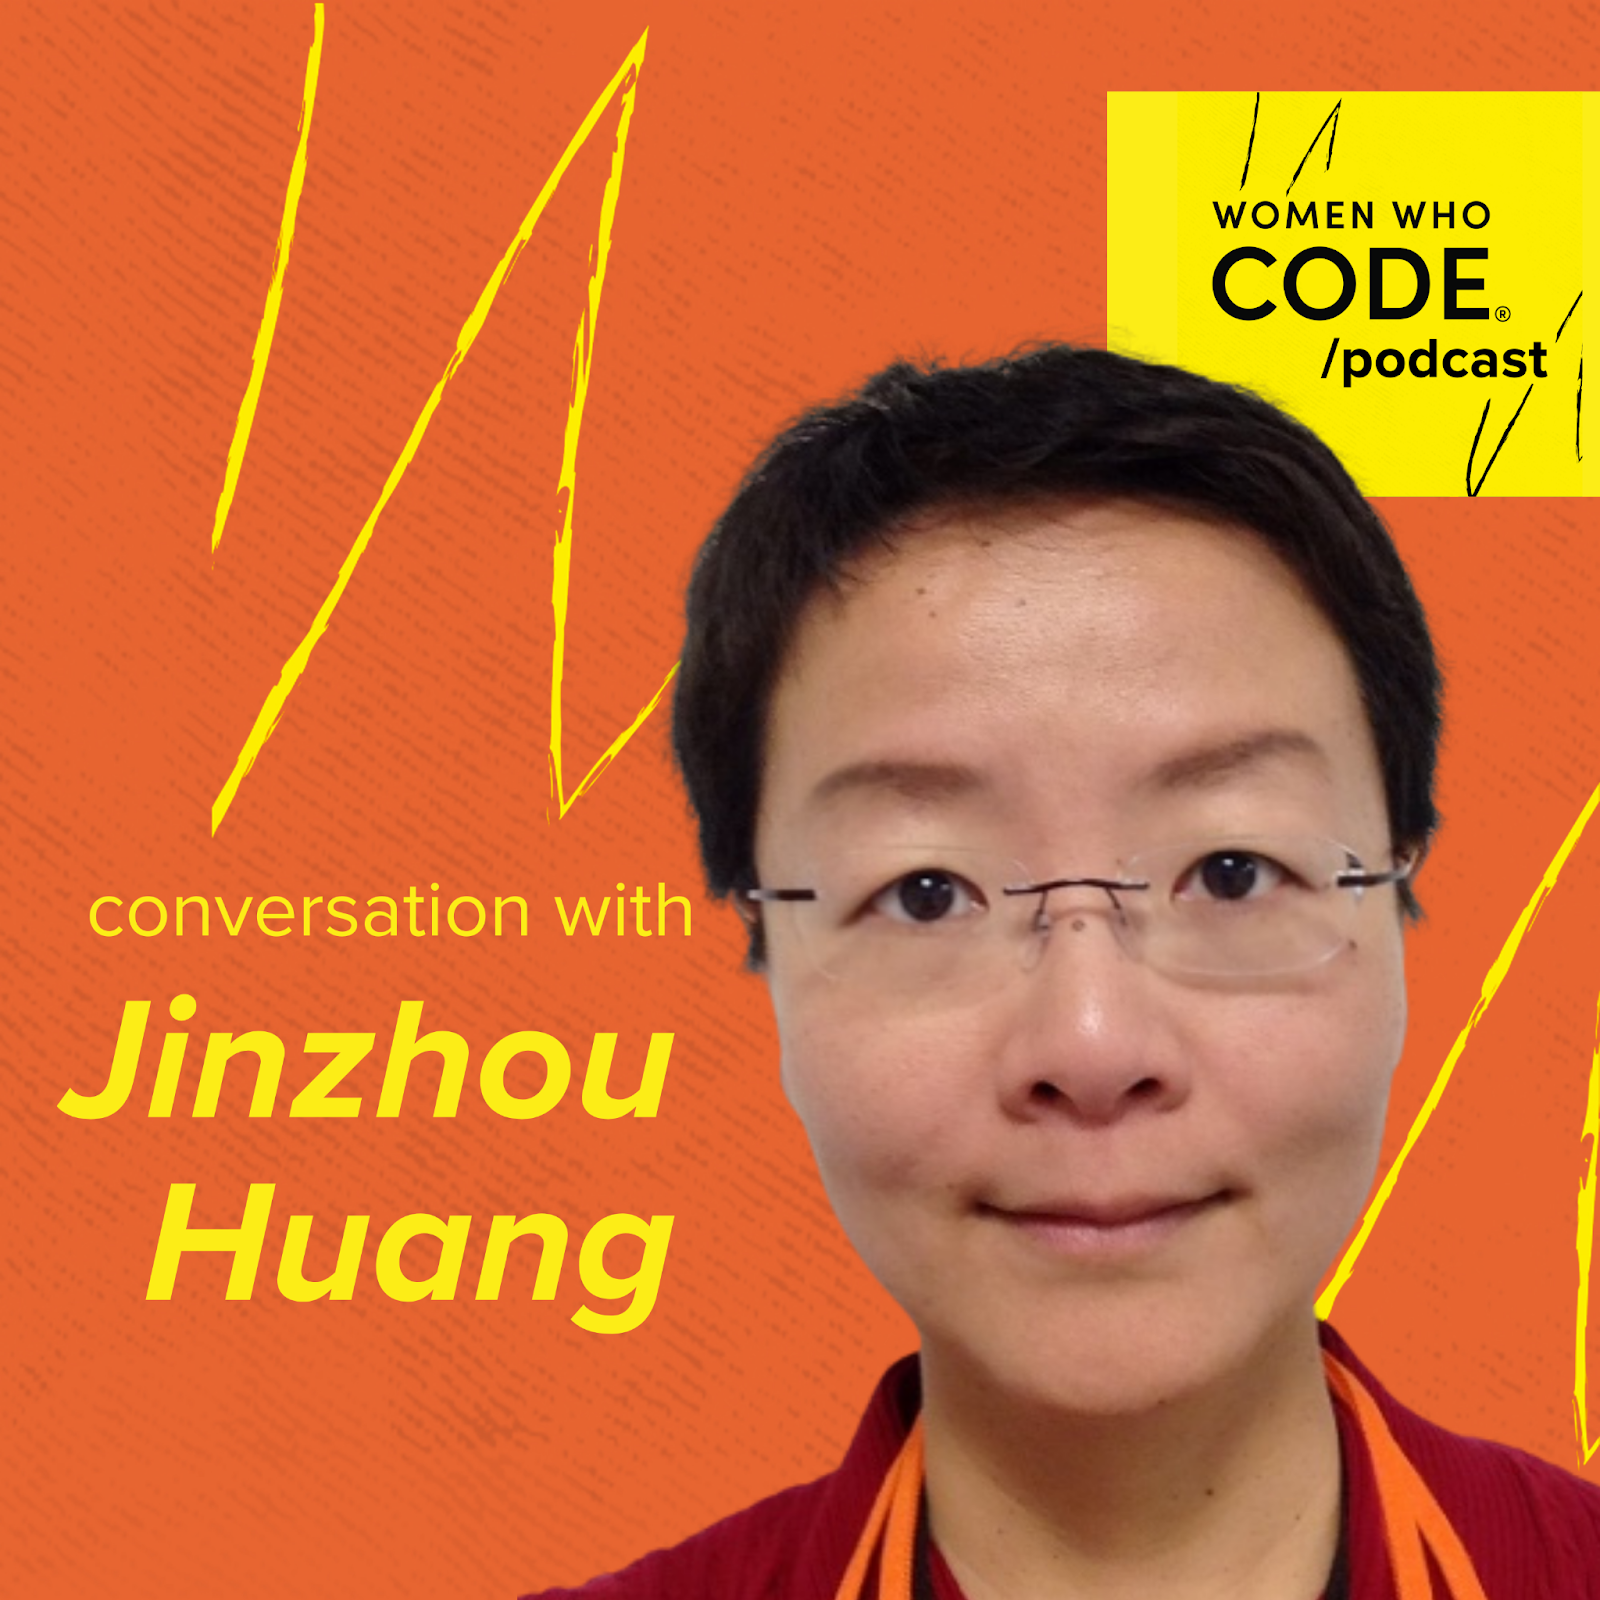 WWCode Podcast #31 – Jinzhou Huang, Director of Data Science at The Home Depot